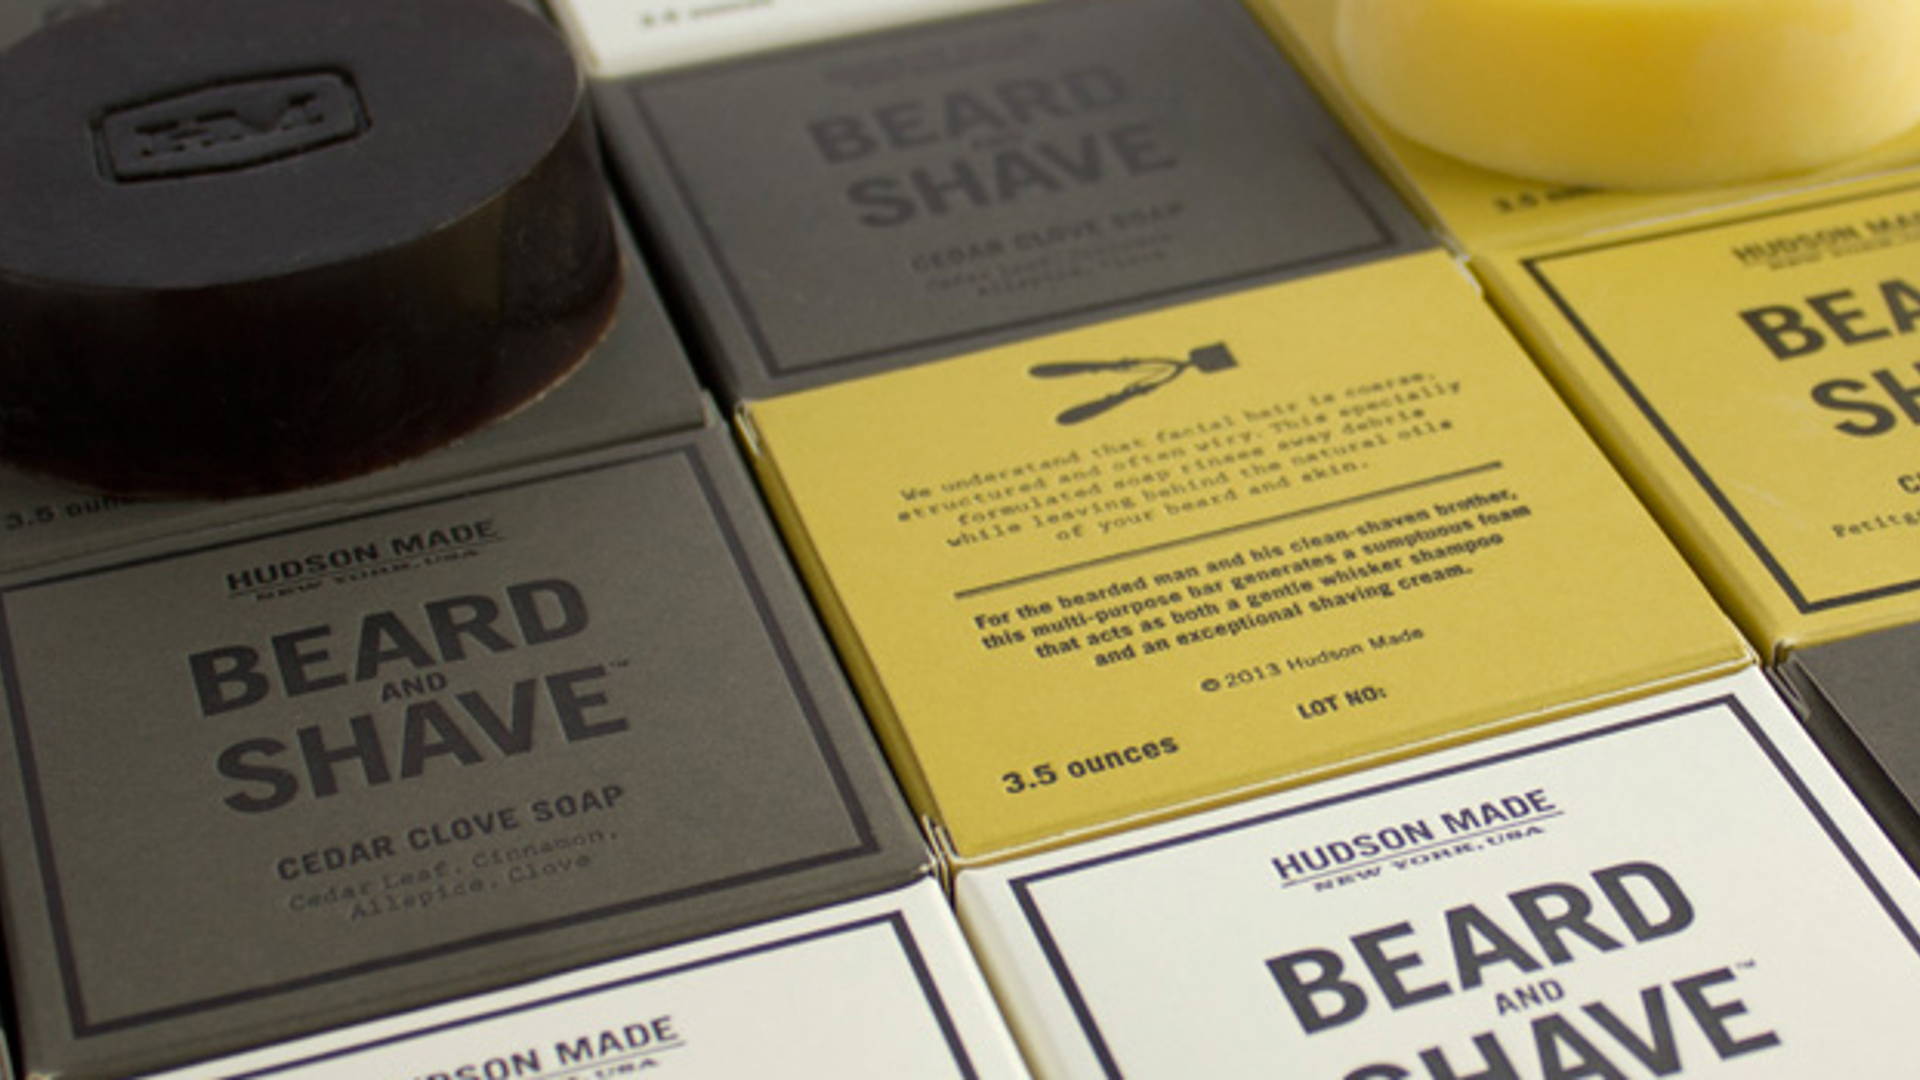 Featured image for Hudson Made, Beard & Shave Soaps 